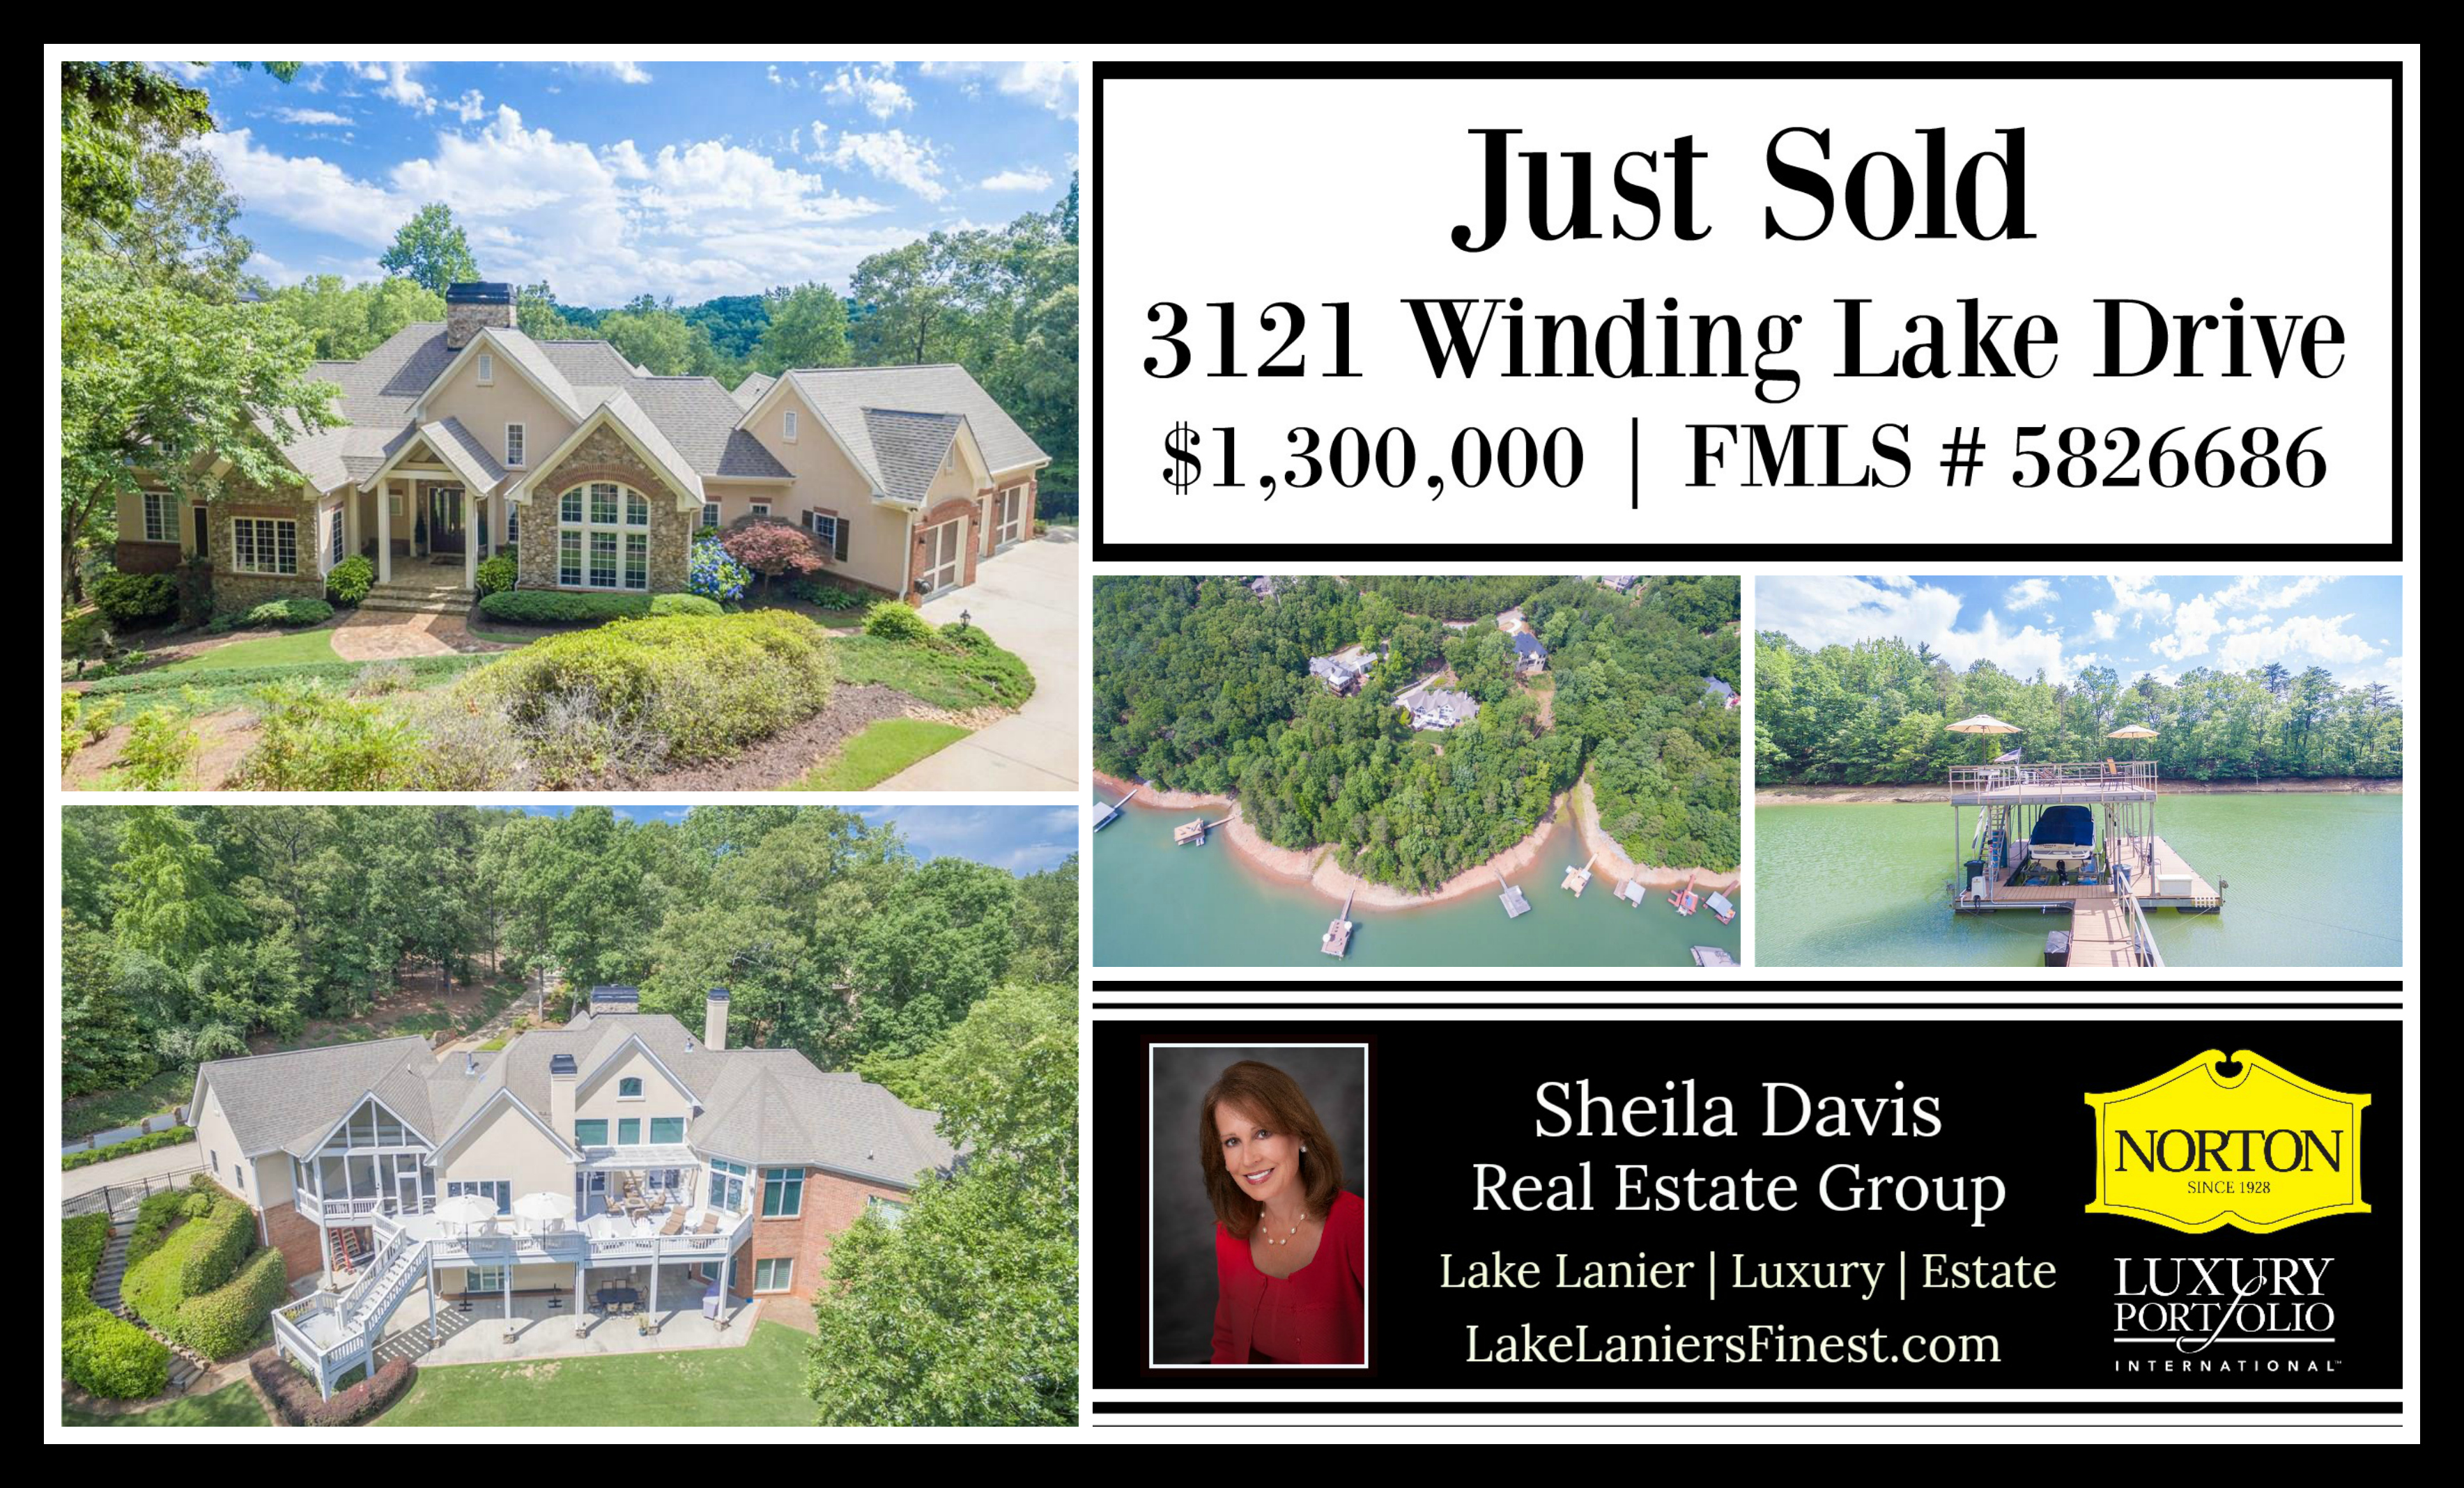 Just Sold 3121 Winding Lake Dr